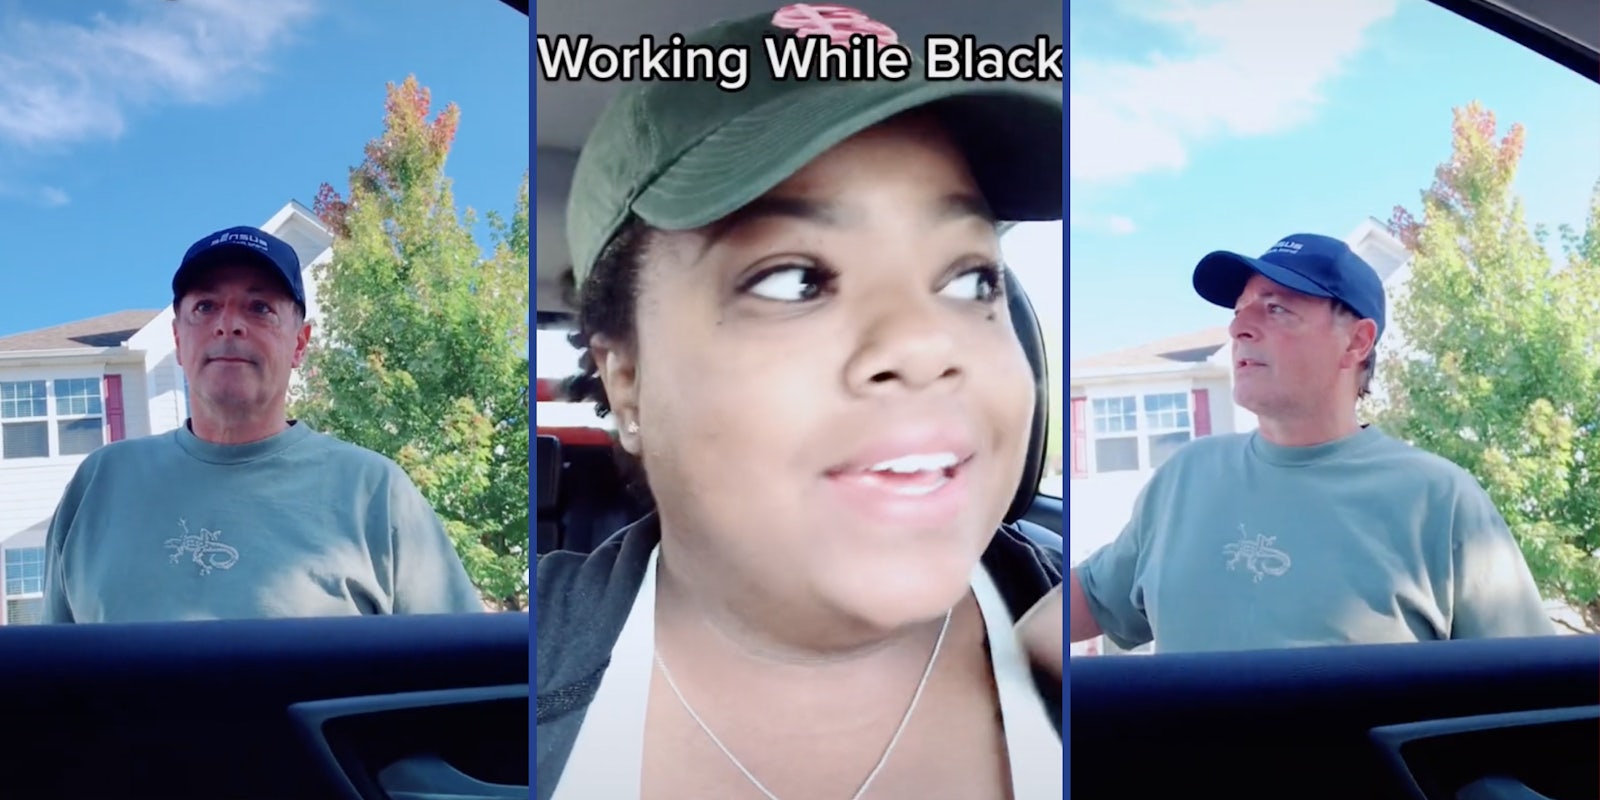 White man attempts to kick out Black Liberty Mutual Agent parked in his neighborhood for work in viral TikTok.